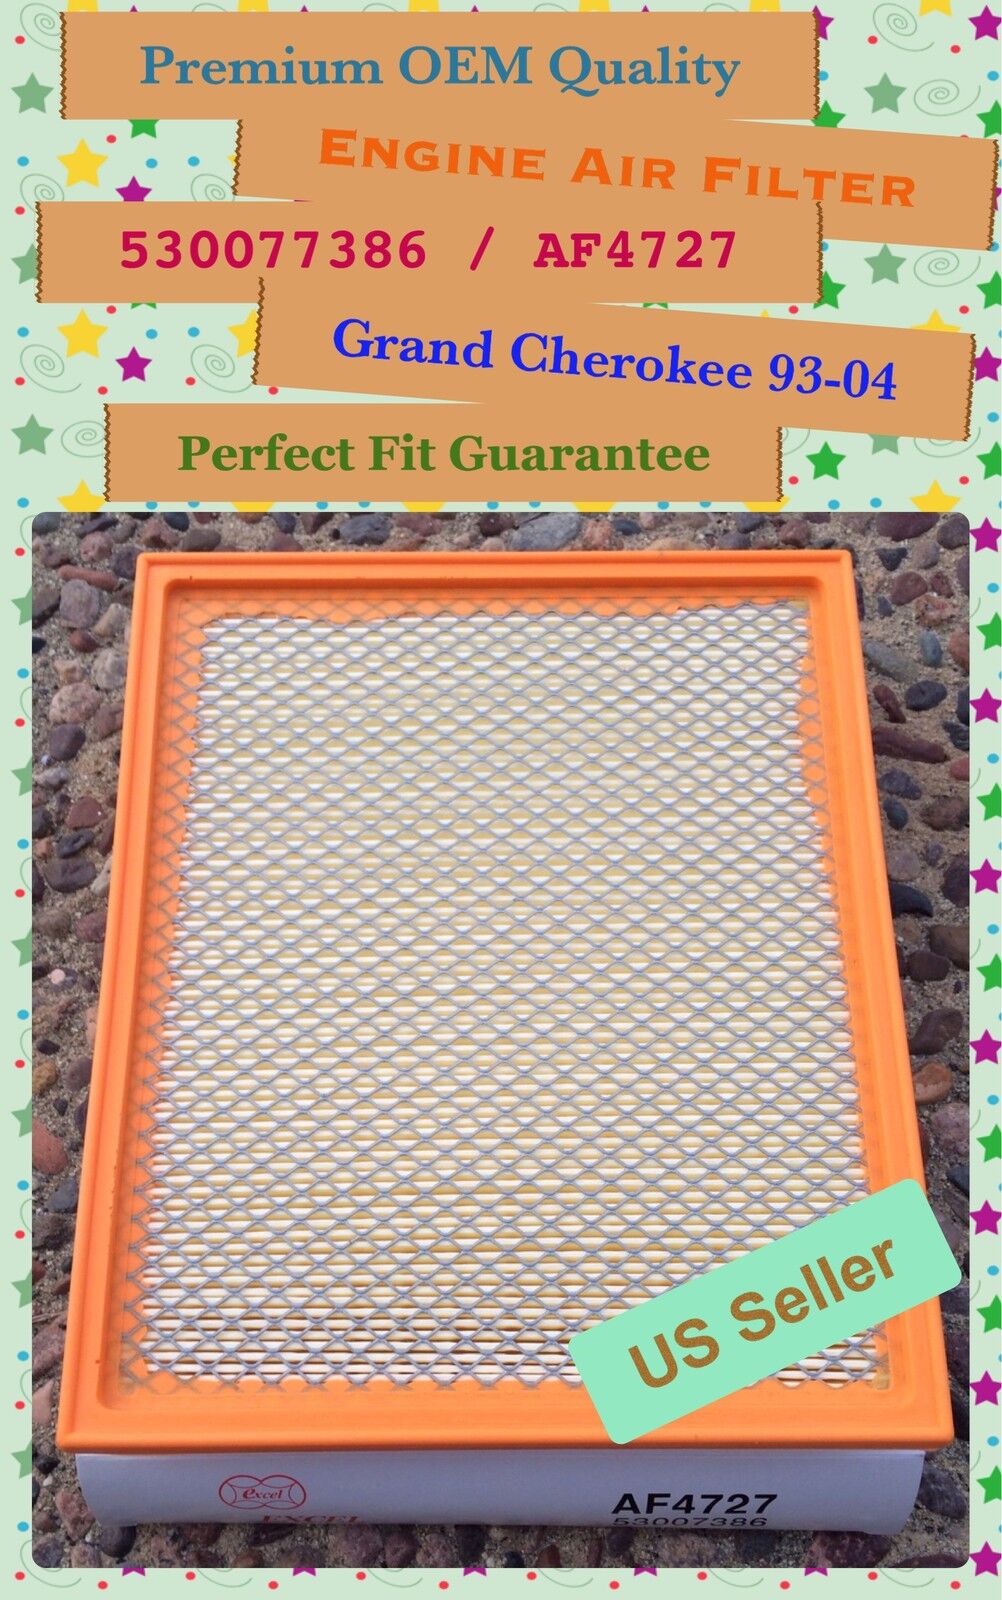 For Grand Cherokee QX56 Frontier V6 Titan Premium Quality Engine Air Filter 4727